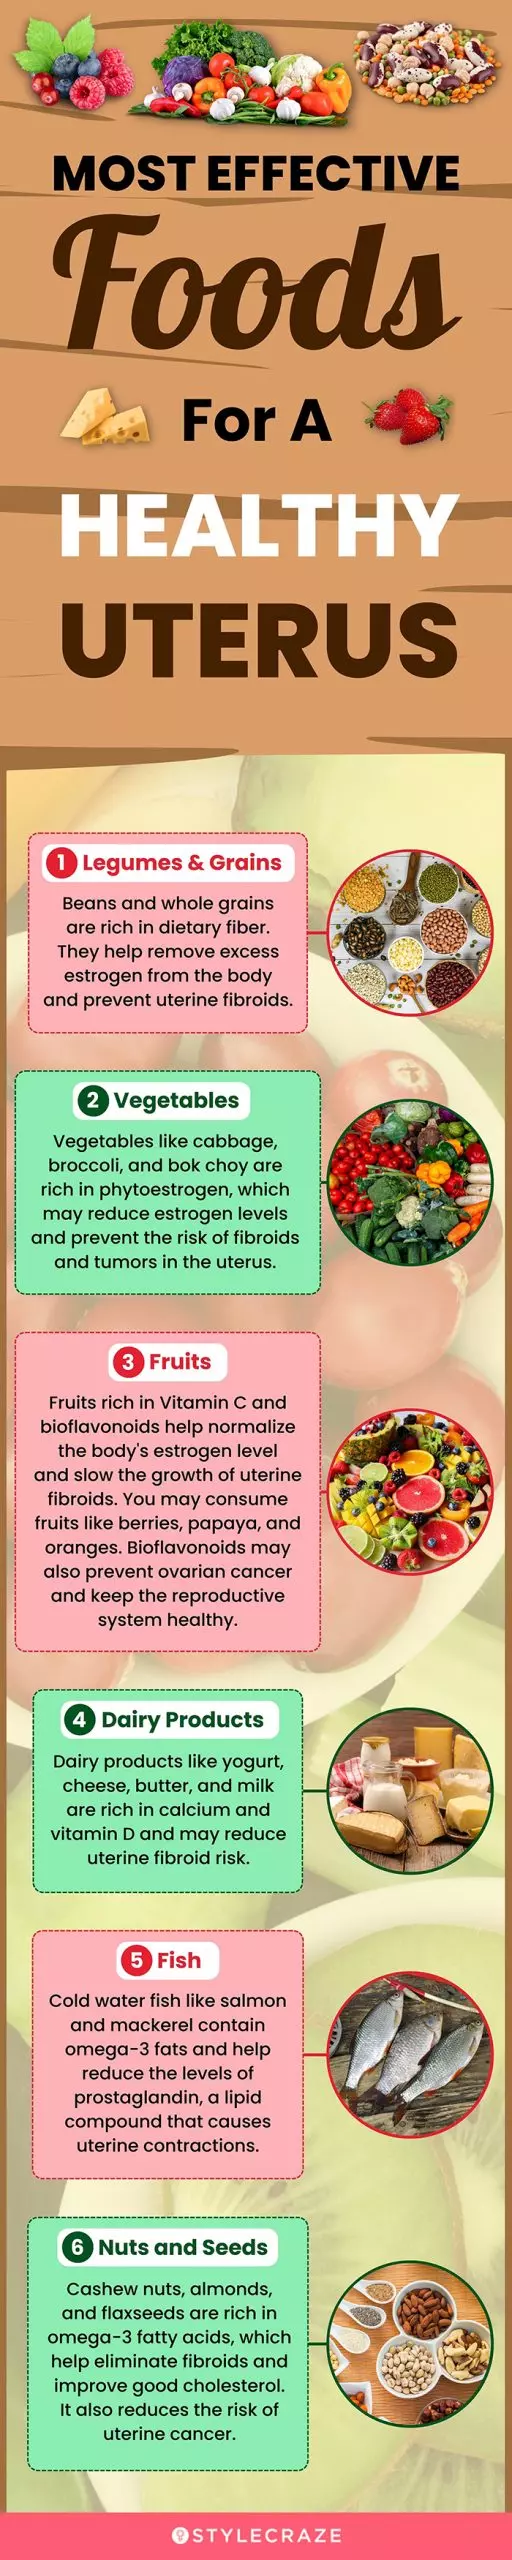 most effective food for a healthy uterus (infographic)